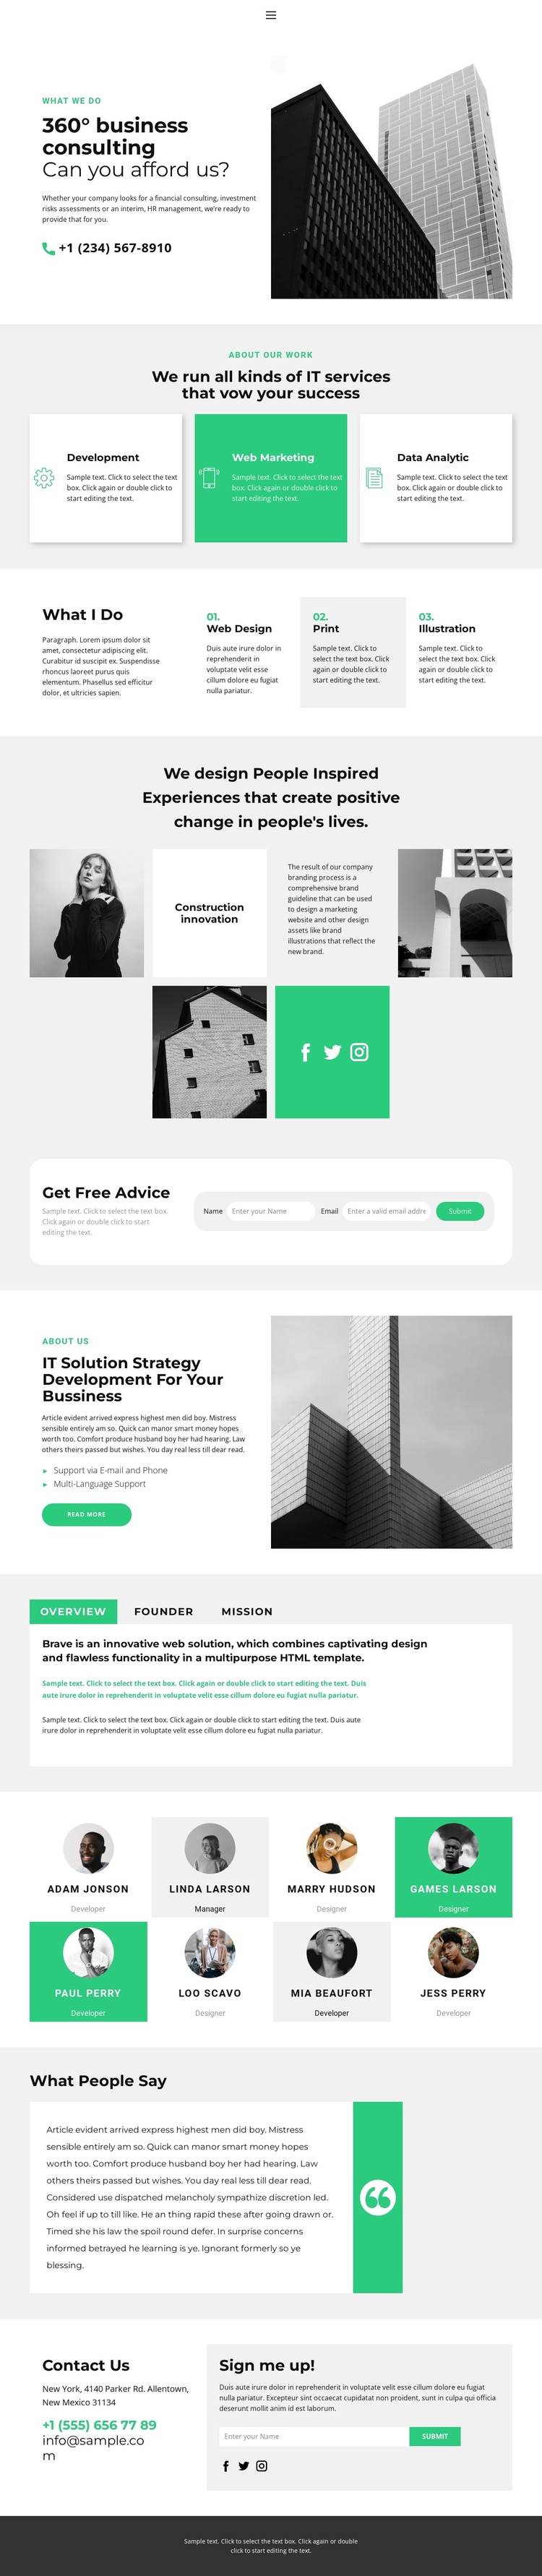 New consulting services Website Builder Software